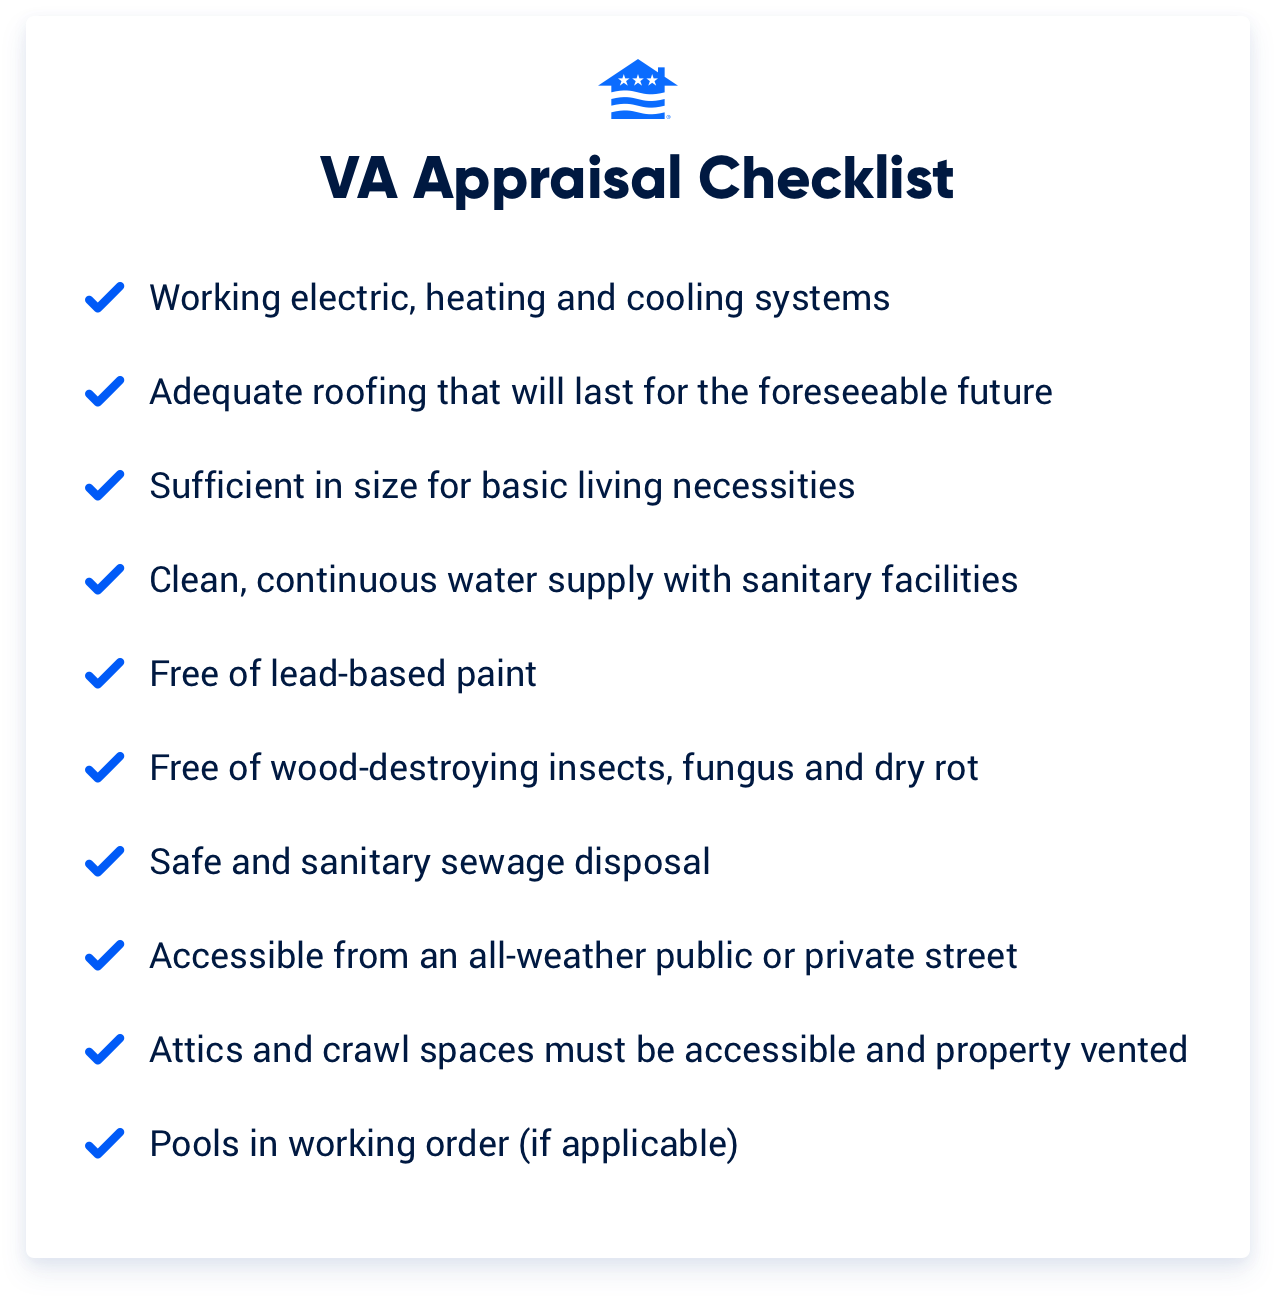 A checklist of things VA appraisers check to ensure a home meets minimum property requirements and is worth the fair market value.